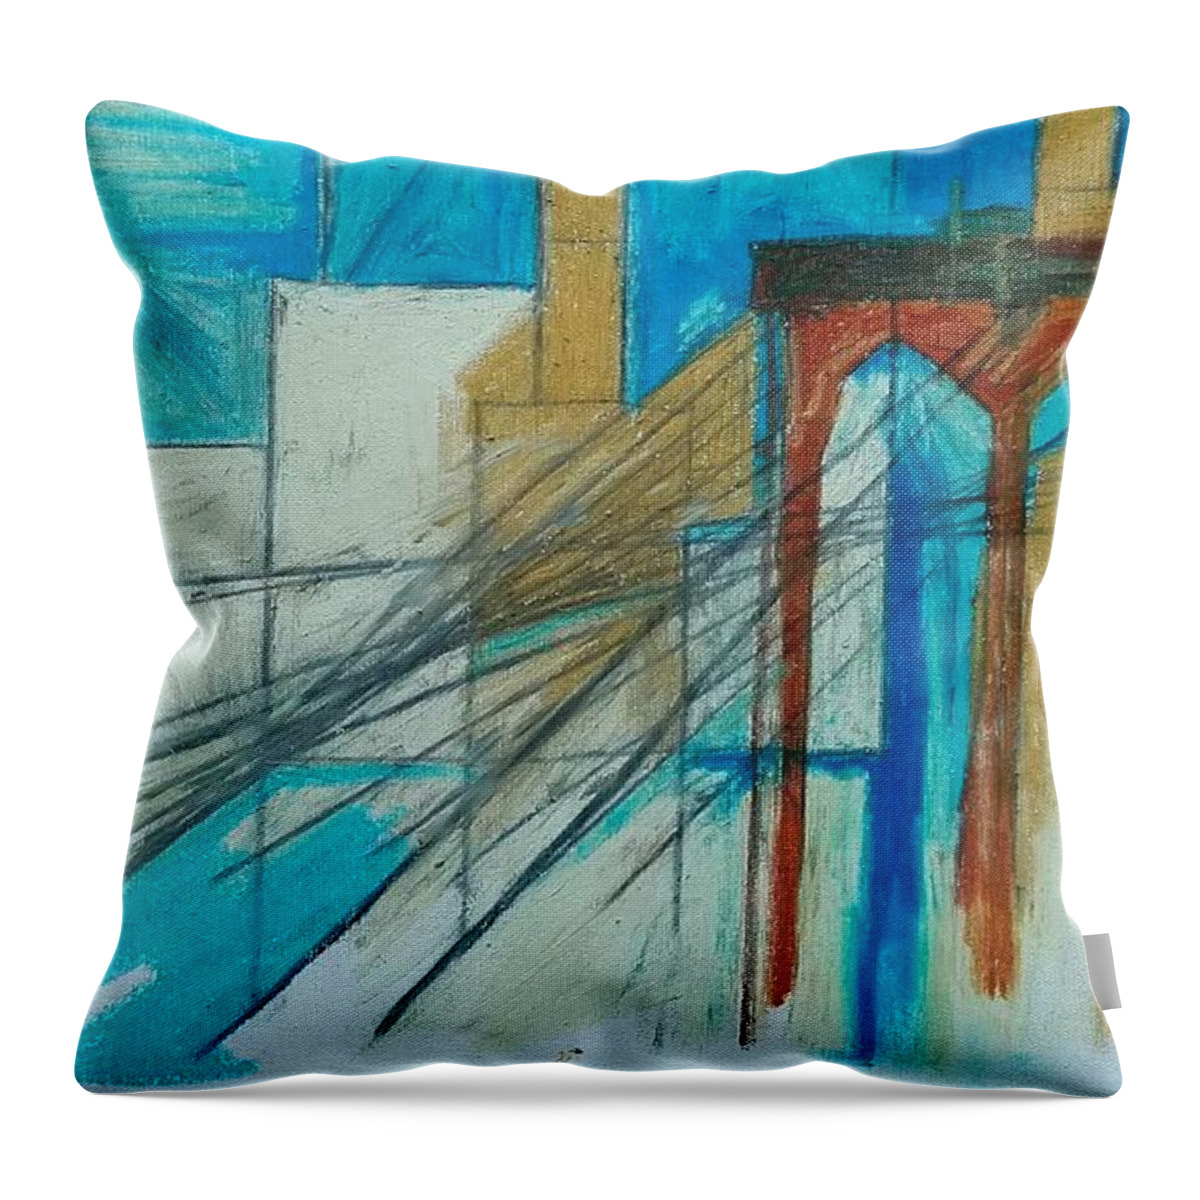 Brooklyn Throw Pillow featuring the drawing The Bridge by Helen Syron